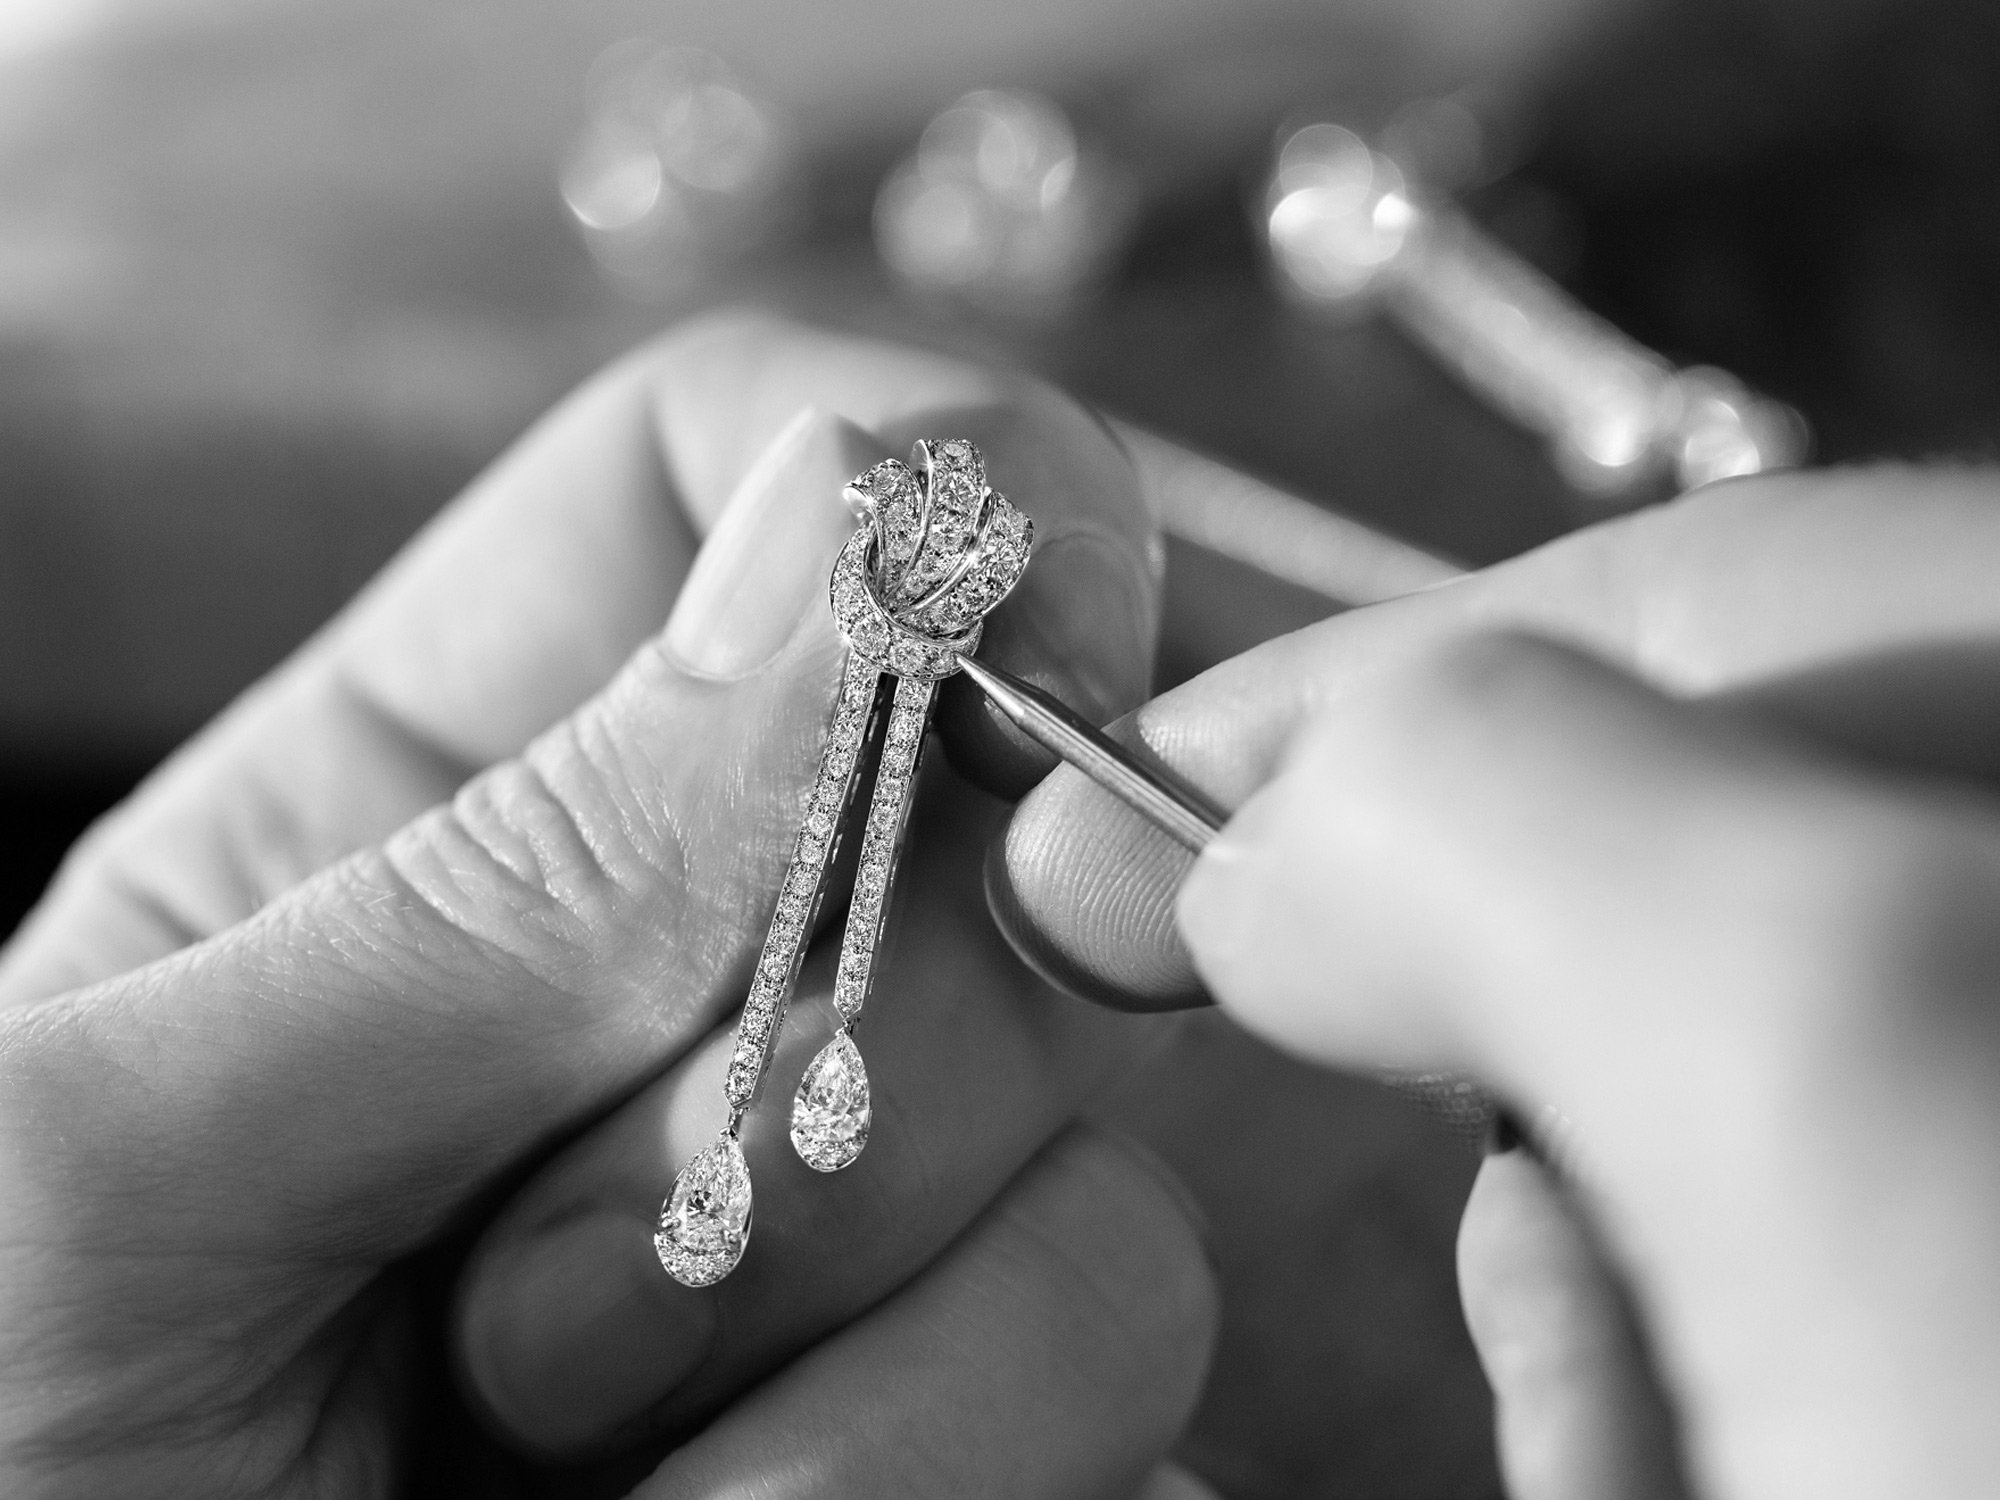 Workshop image of Graff Tilda's Bow earring being worked on